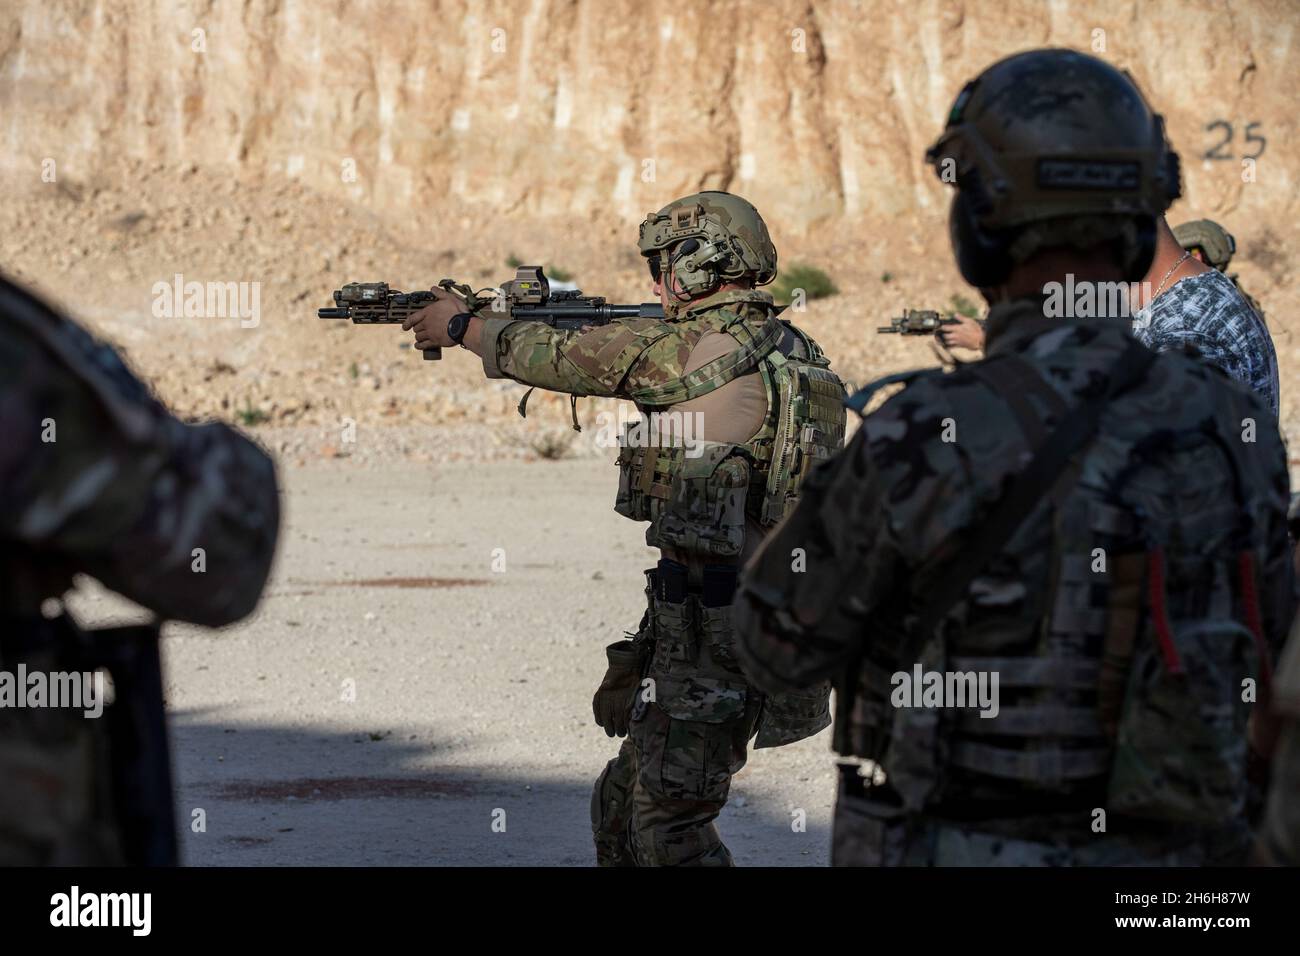 A 5th Special Forces Group soldier demonstrates the proper technique for a combat marksmanship drill during a Joint Combined Exchange Training (JCET) at the Zarqu Training Area, Jordan, Nov. 9, 2021. The multi-week JCET conducted with the Jordanian 1st Company, 101st Special Forces Brigade will cover different shooting tactics and medical training in order to build confidence working alongside partner forces for future counter Daesh operations. Stock Photo